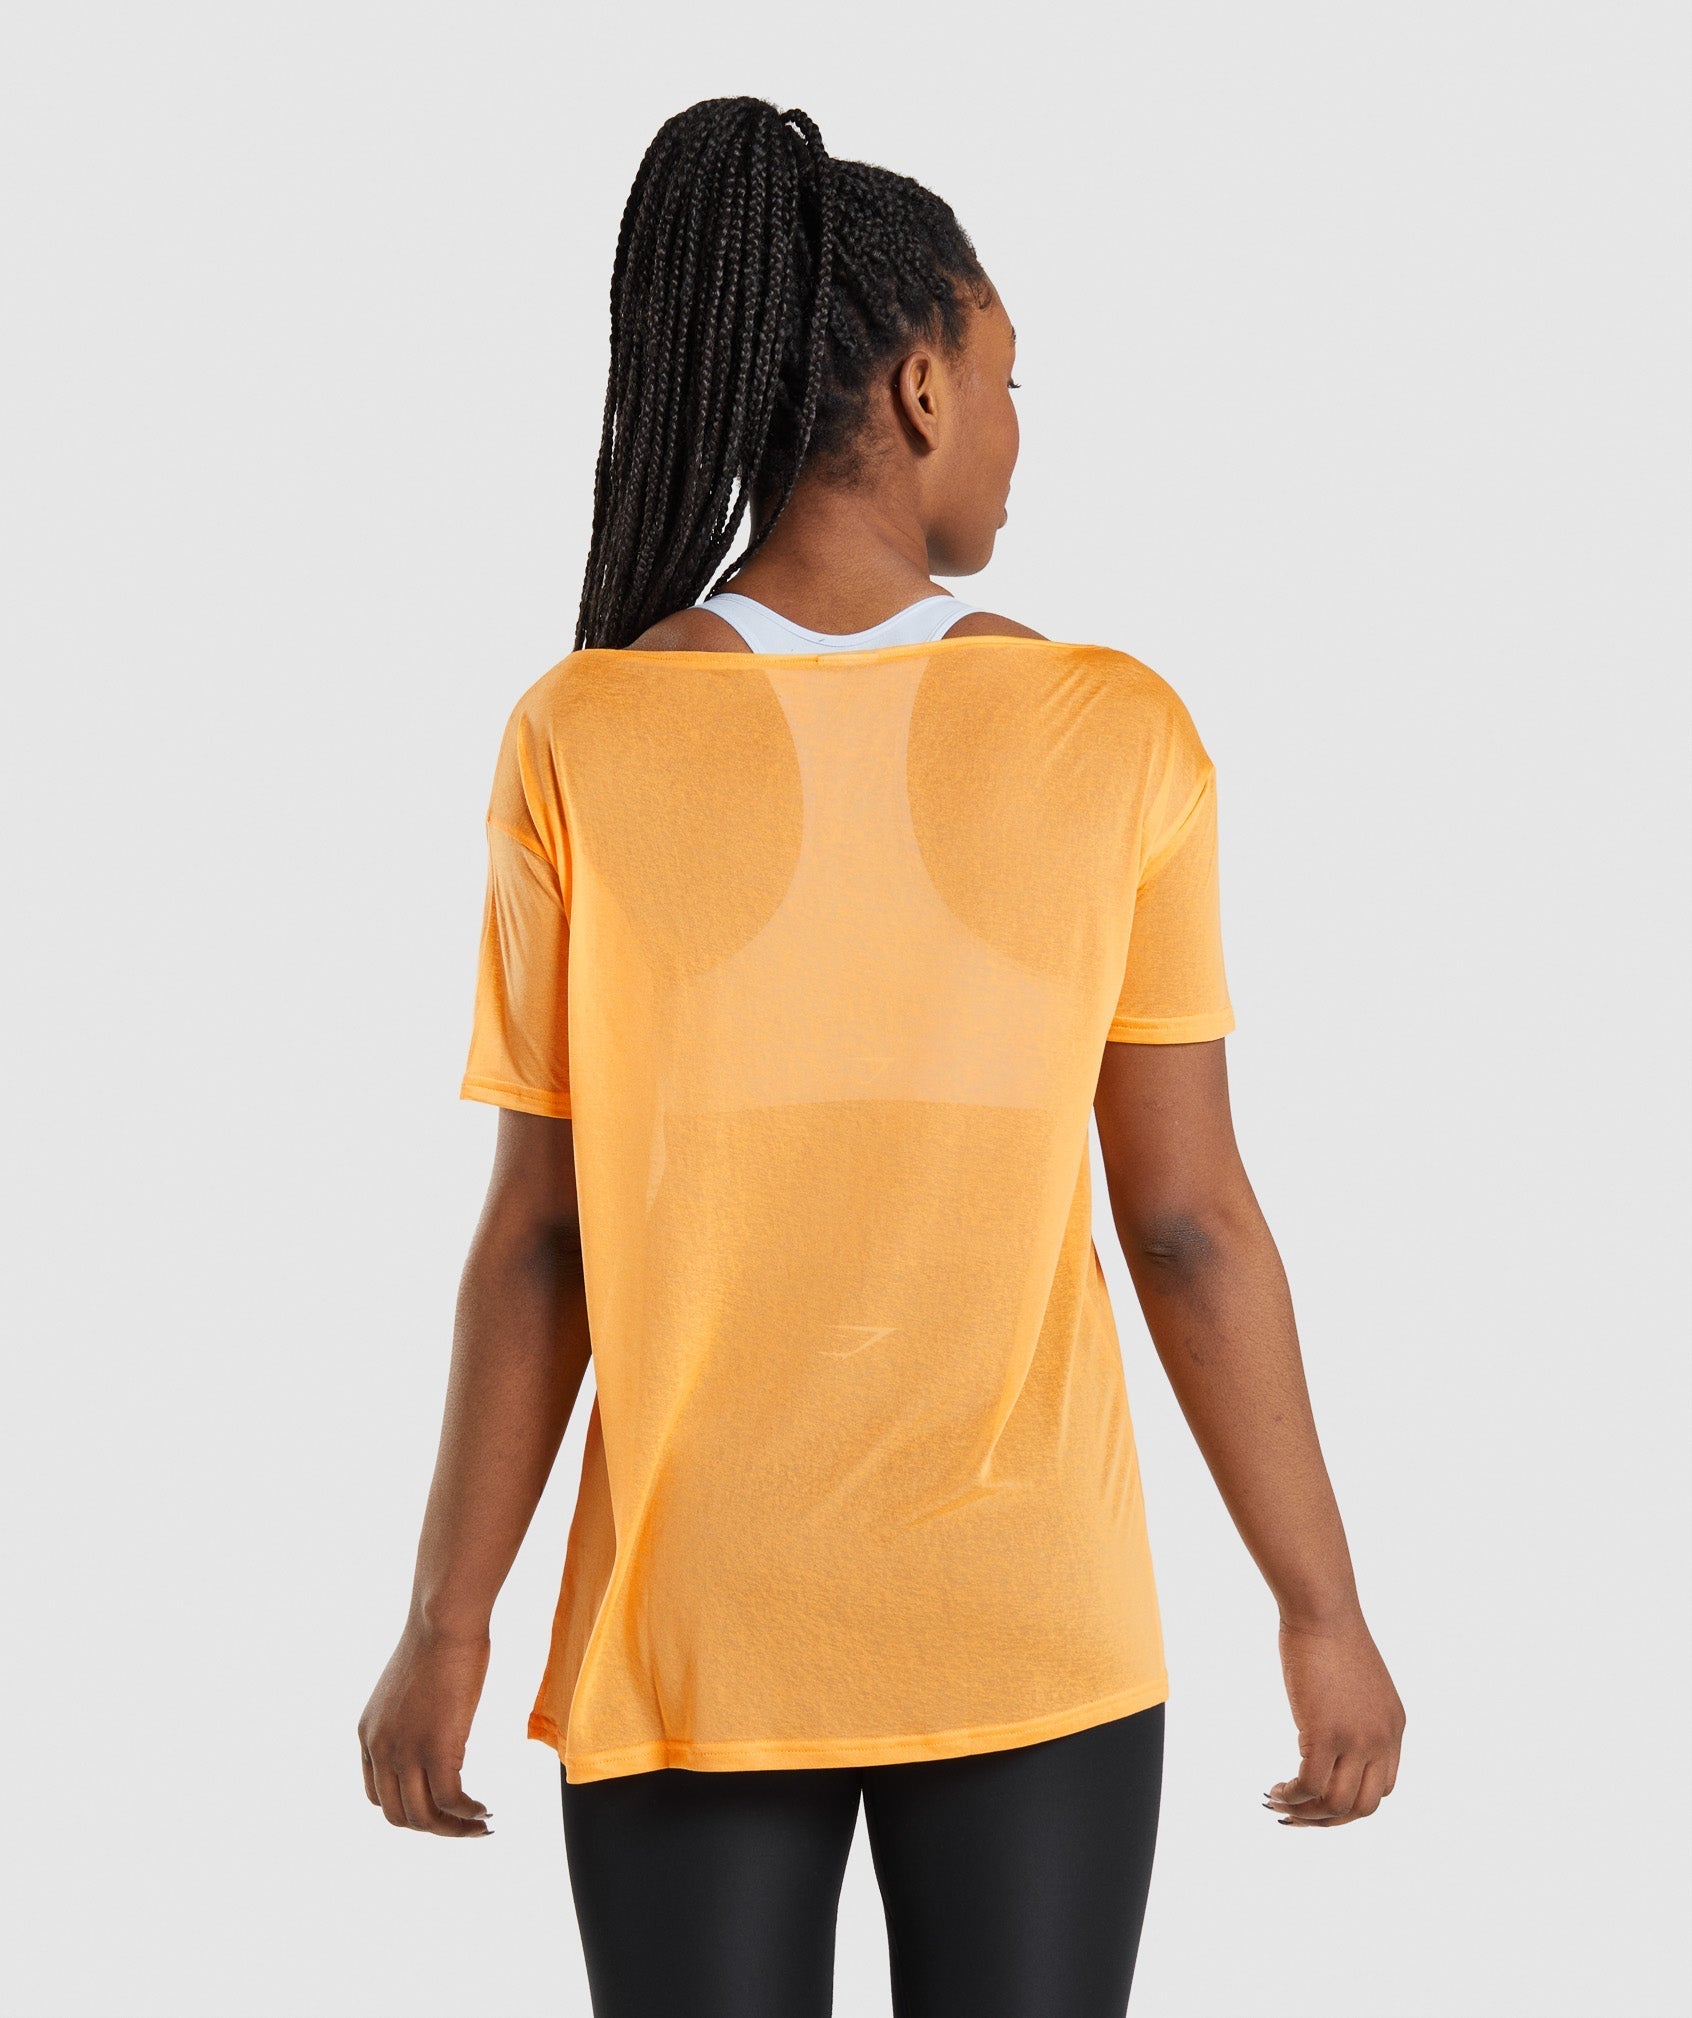 Training Oversized Top in Apricot Orange - view 2